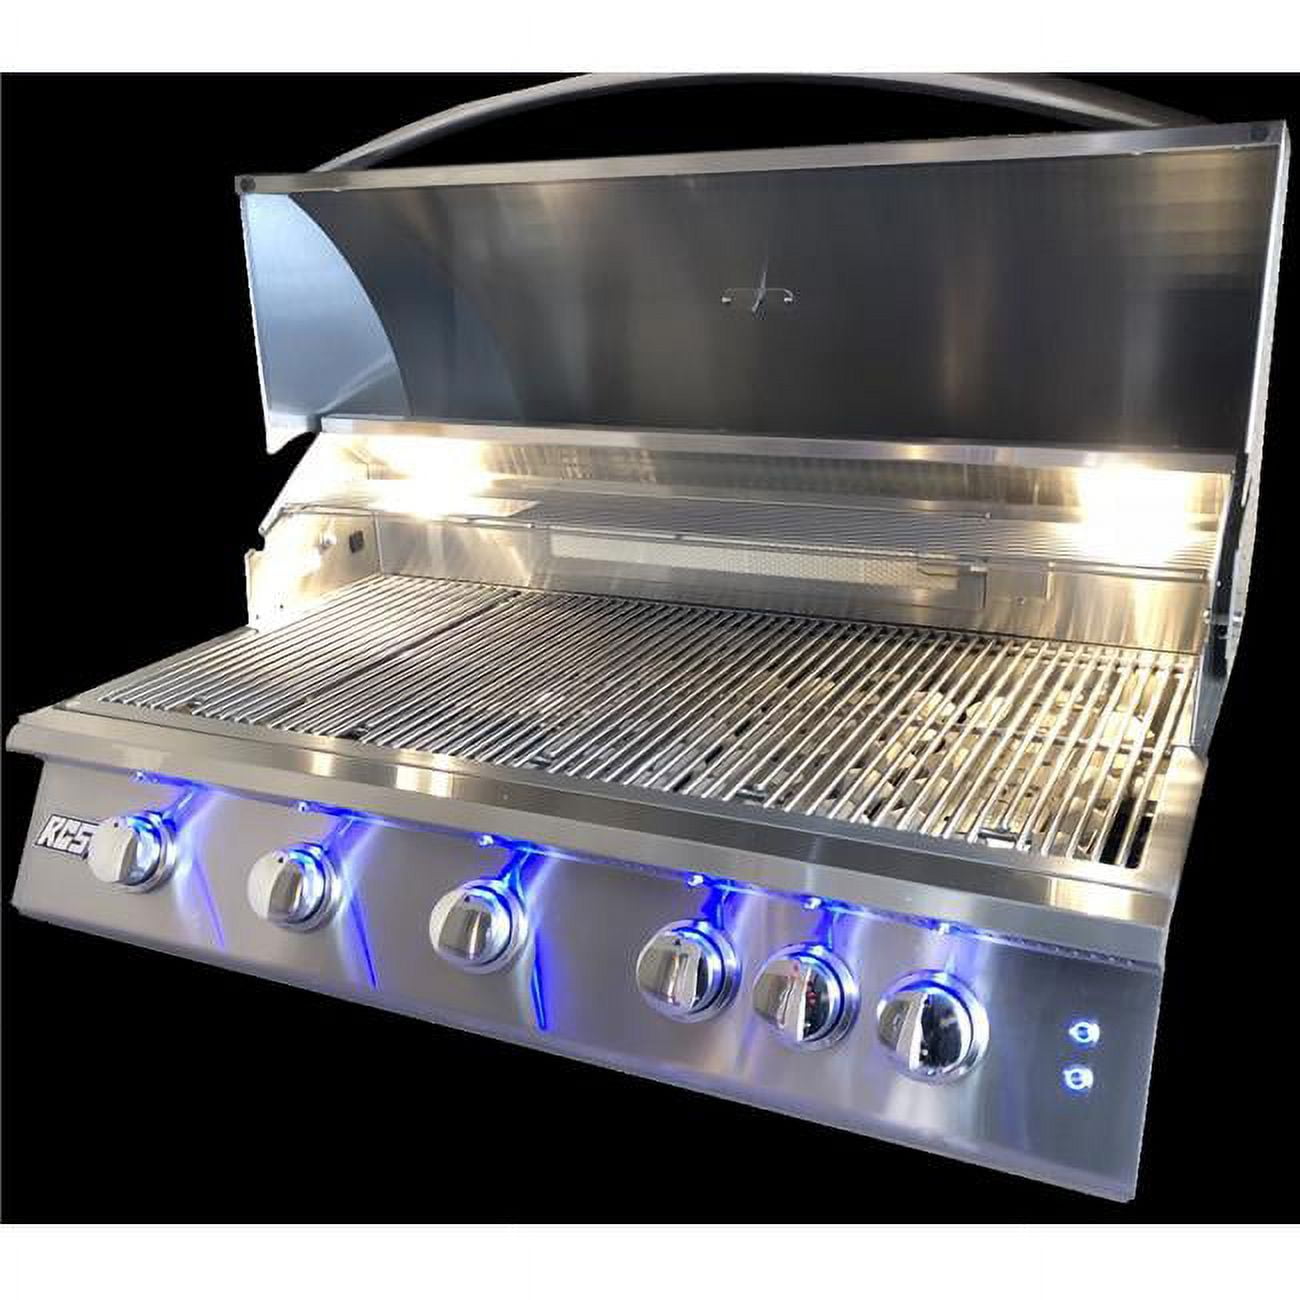 PerfectPatio 40 in.Premier Grill, Blue LED with Rear Burner-Propane